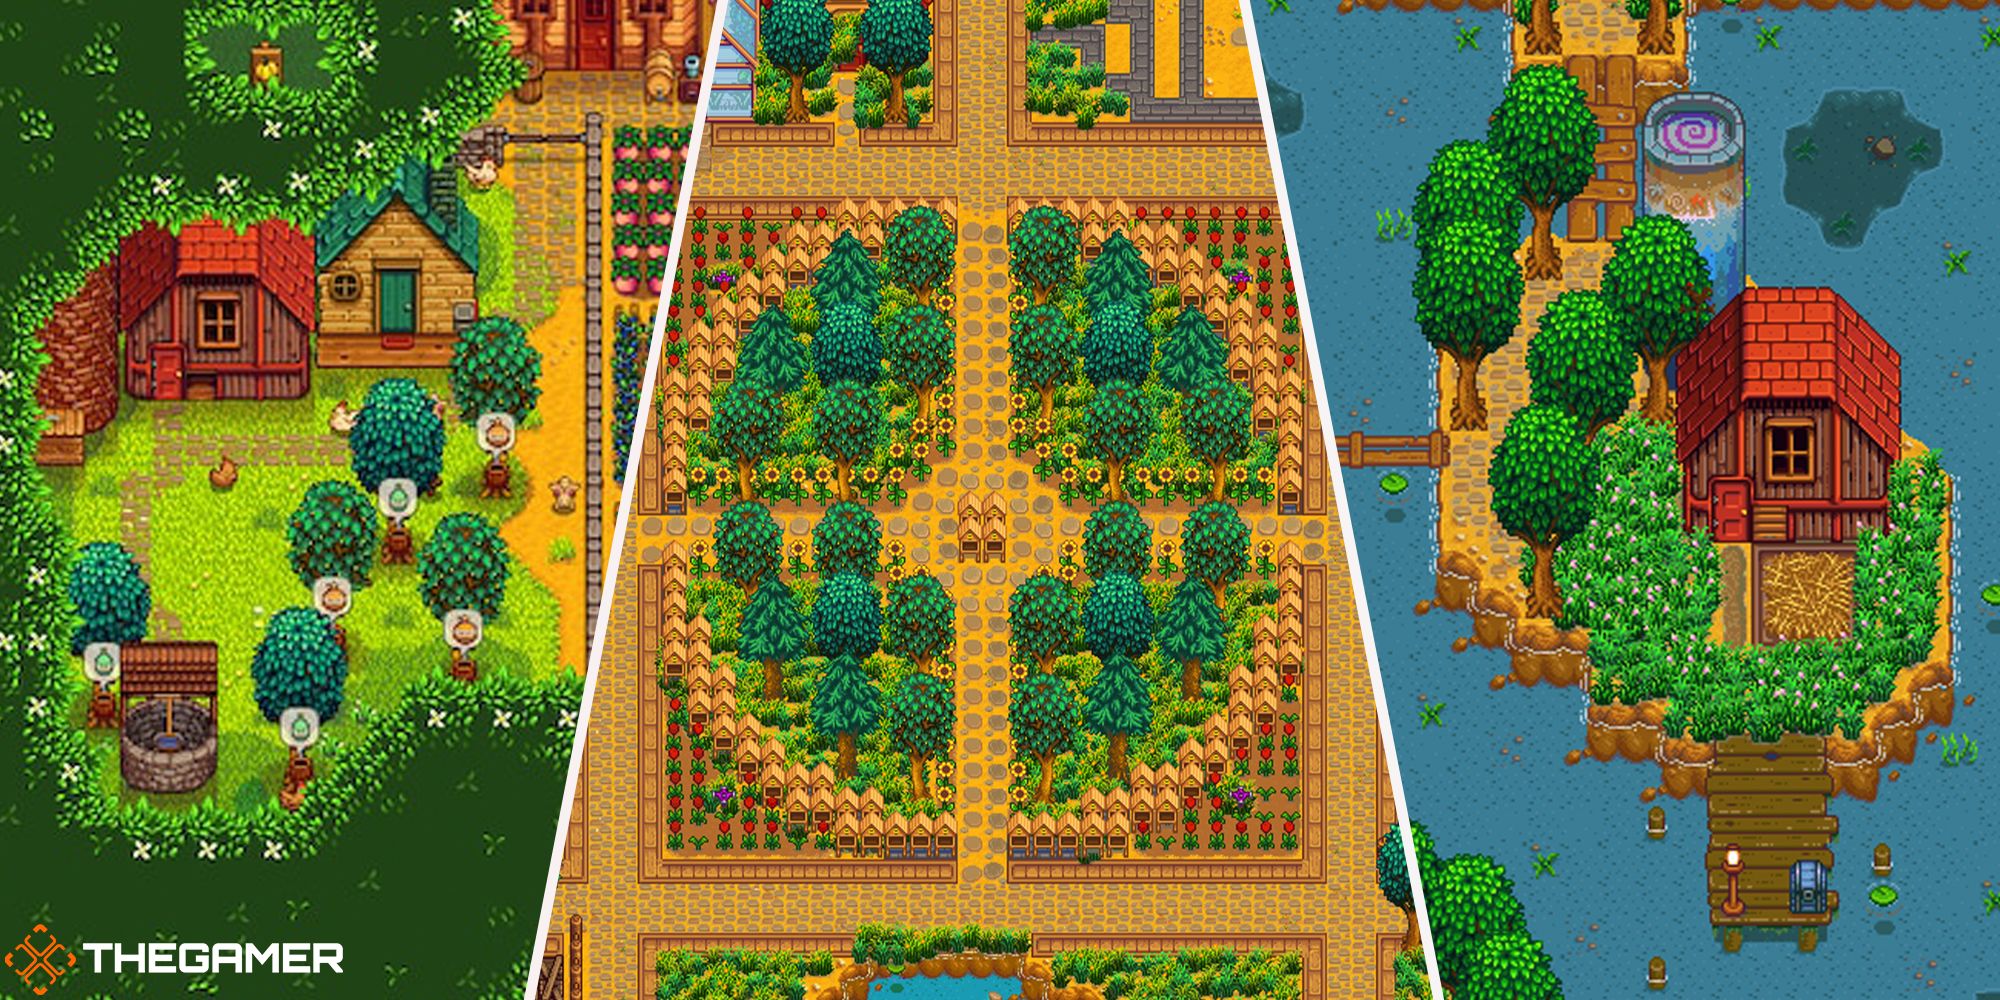 Stardew Valley: Every Farm Map, Ranked